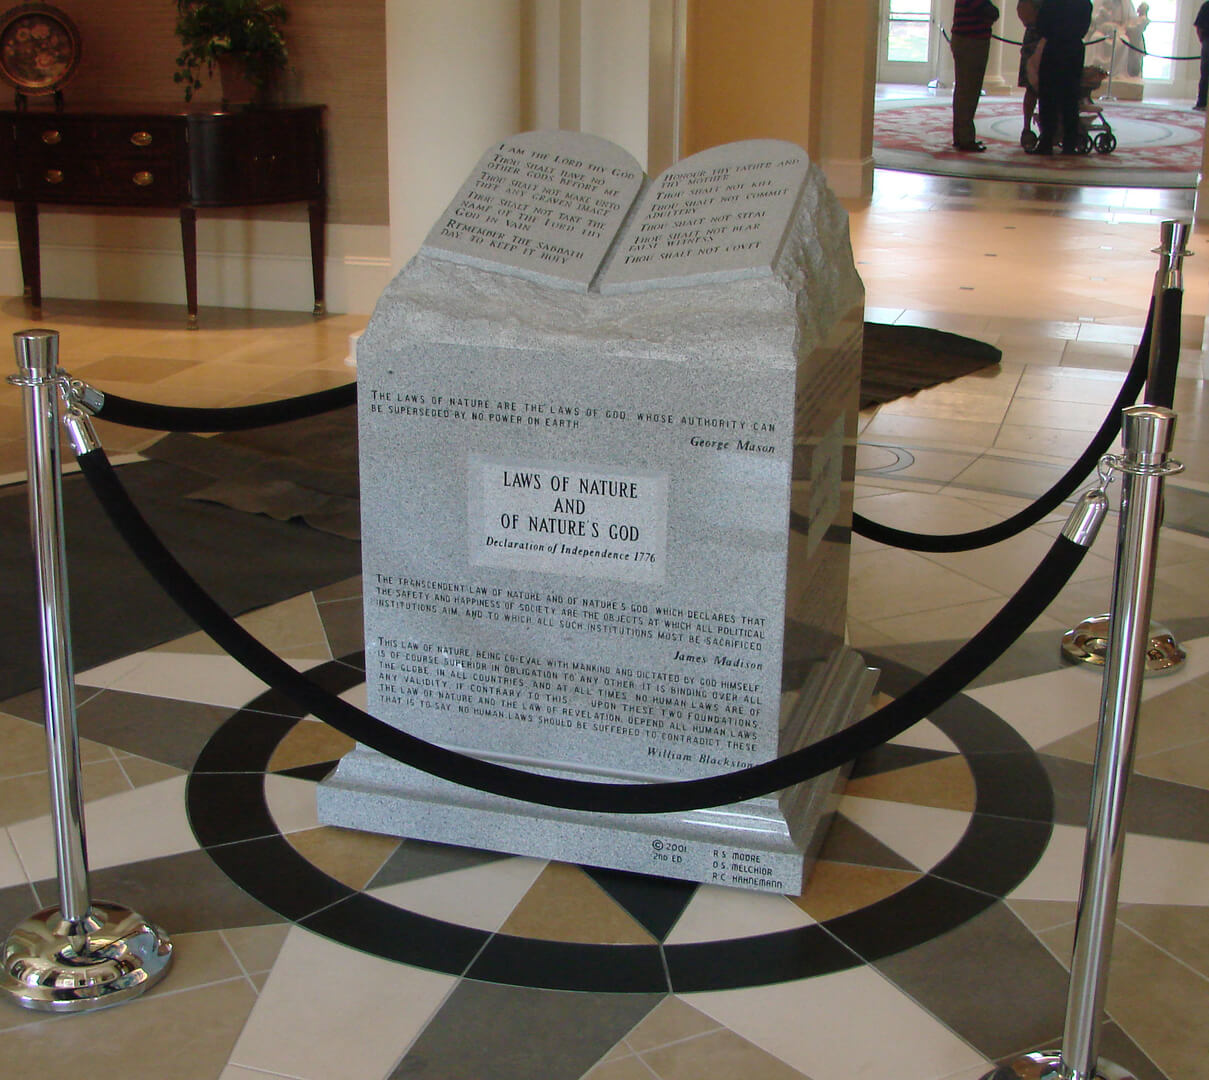 A memorial slab with the quote from the bible and historical figures